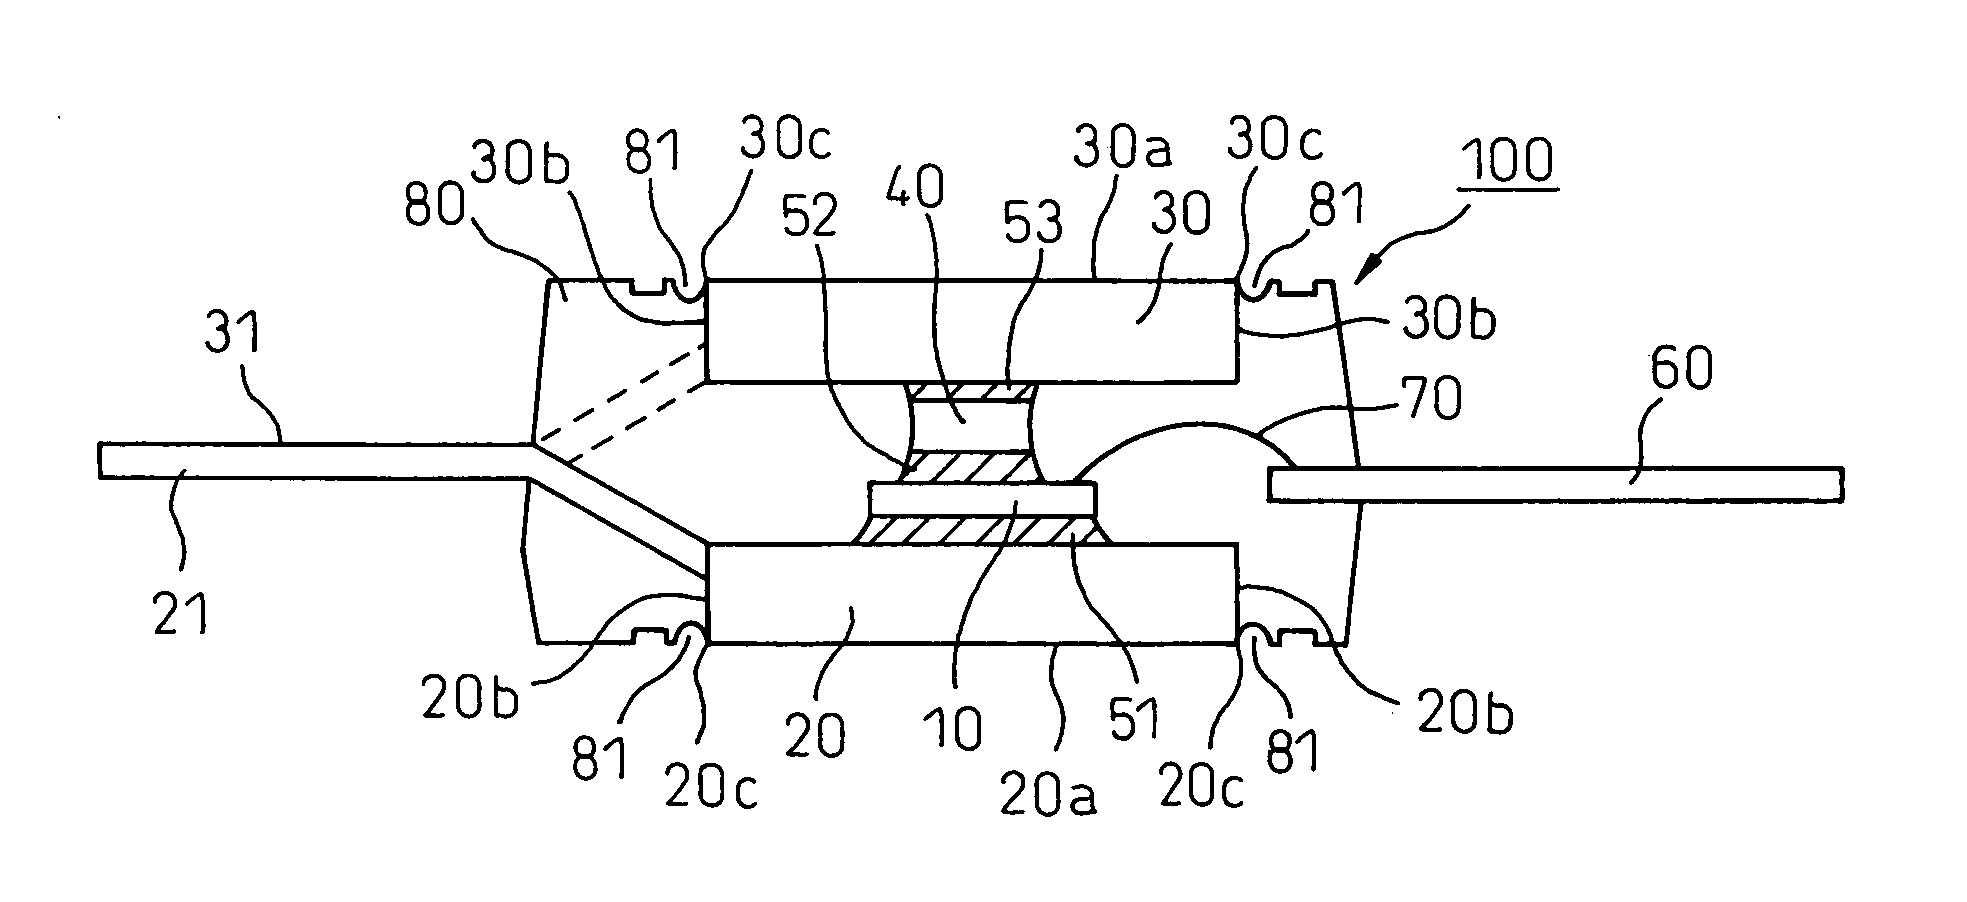 Semiconductor device, method and apparatus for fabricating the same